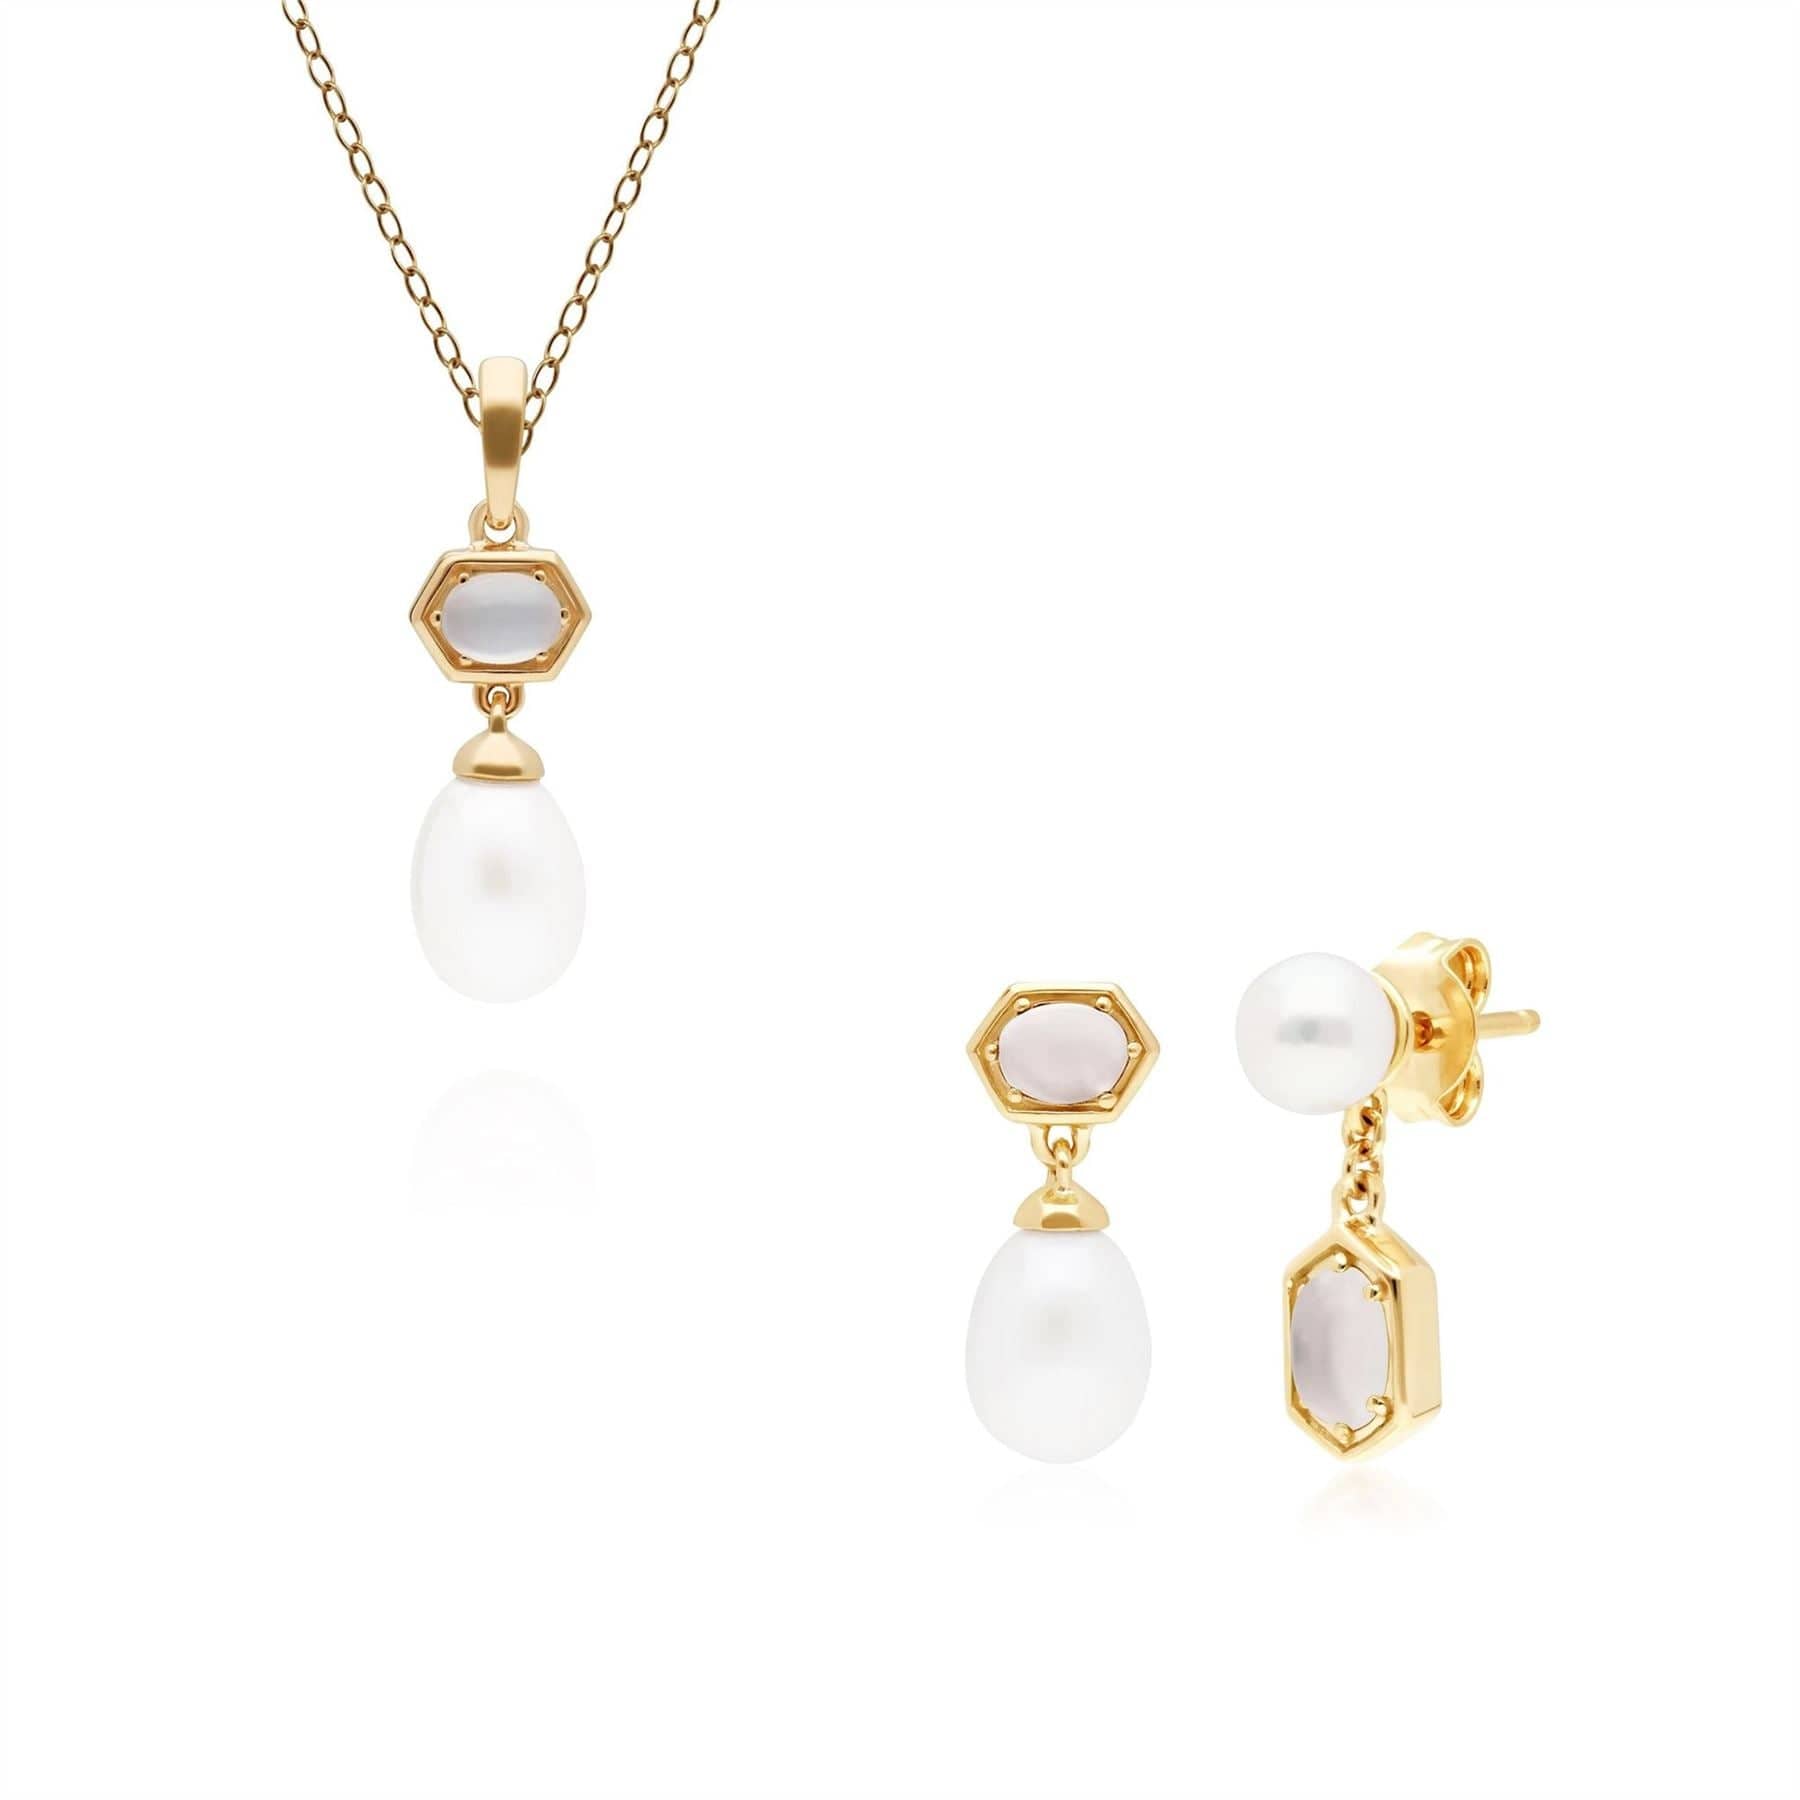 270P030602925-270E030602925 Modern Pearl & Moonstone Pendant & Earring Set in Gold Plated Silver 1